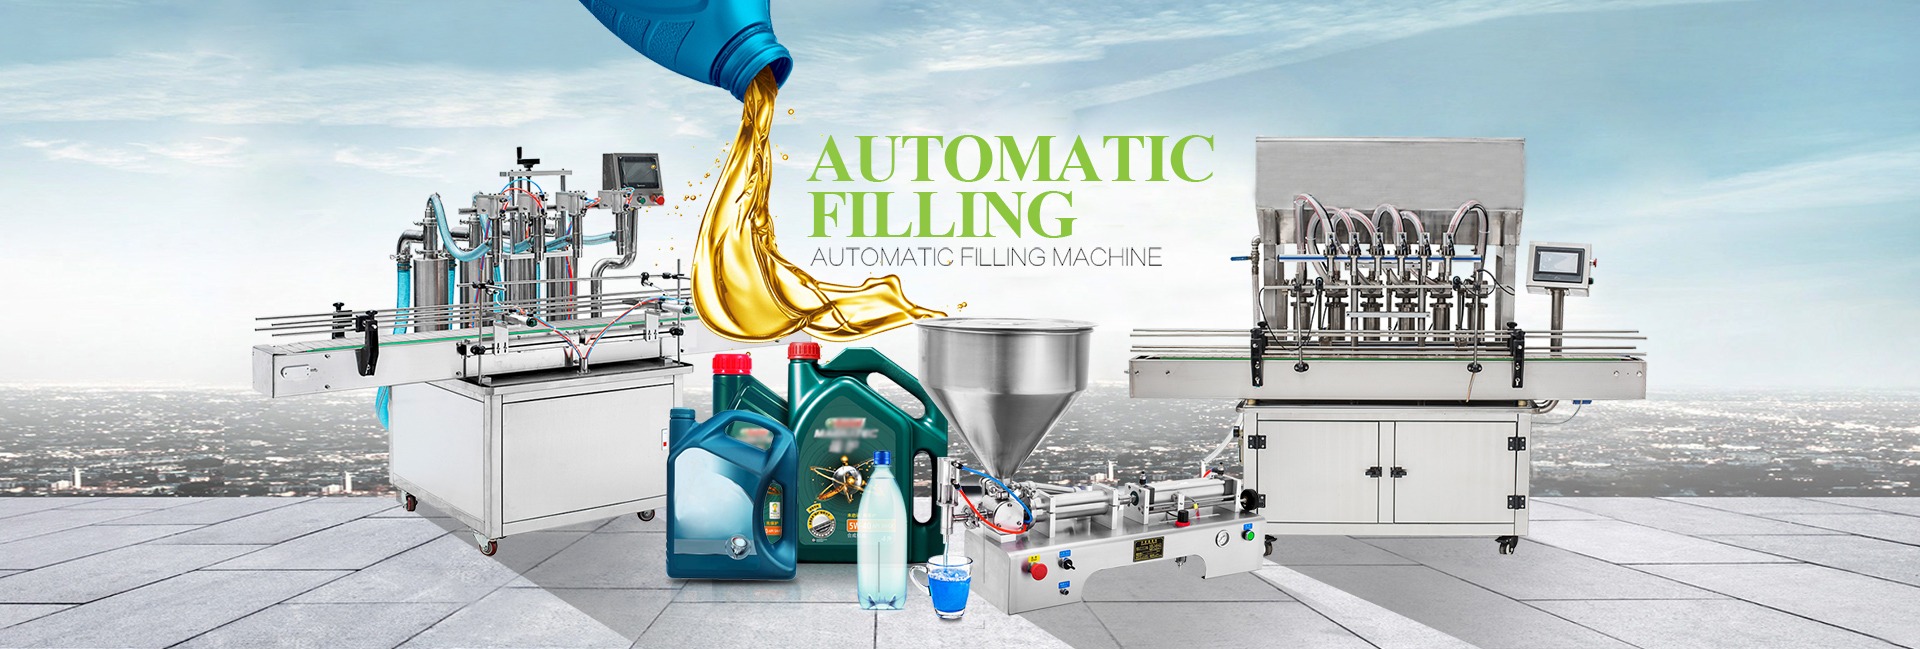 Automatic filling machine have two styles.One is for liquid and others can be used for paste.It can be used in production Line.Industry equippment,which have greatly improved the working efficiency.